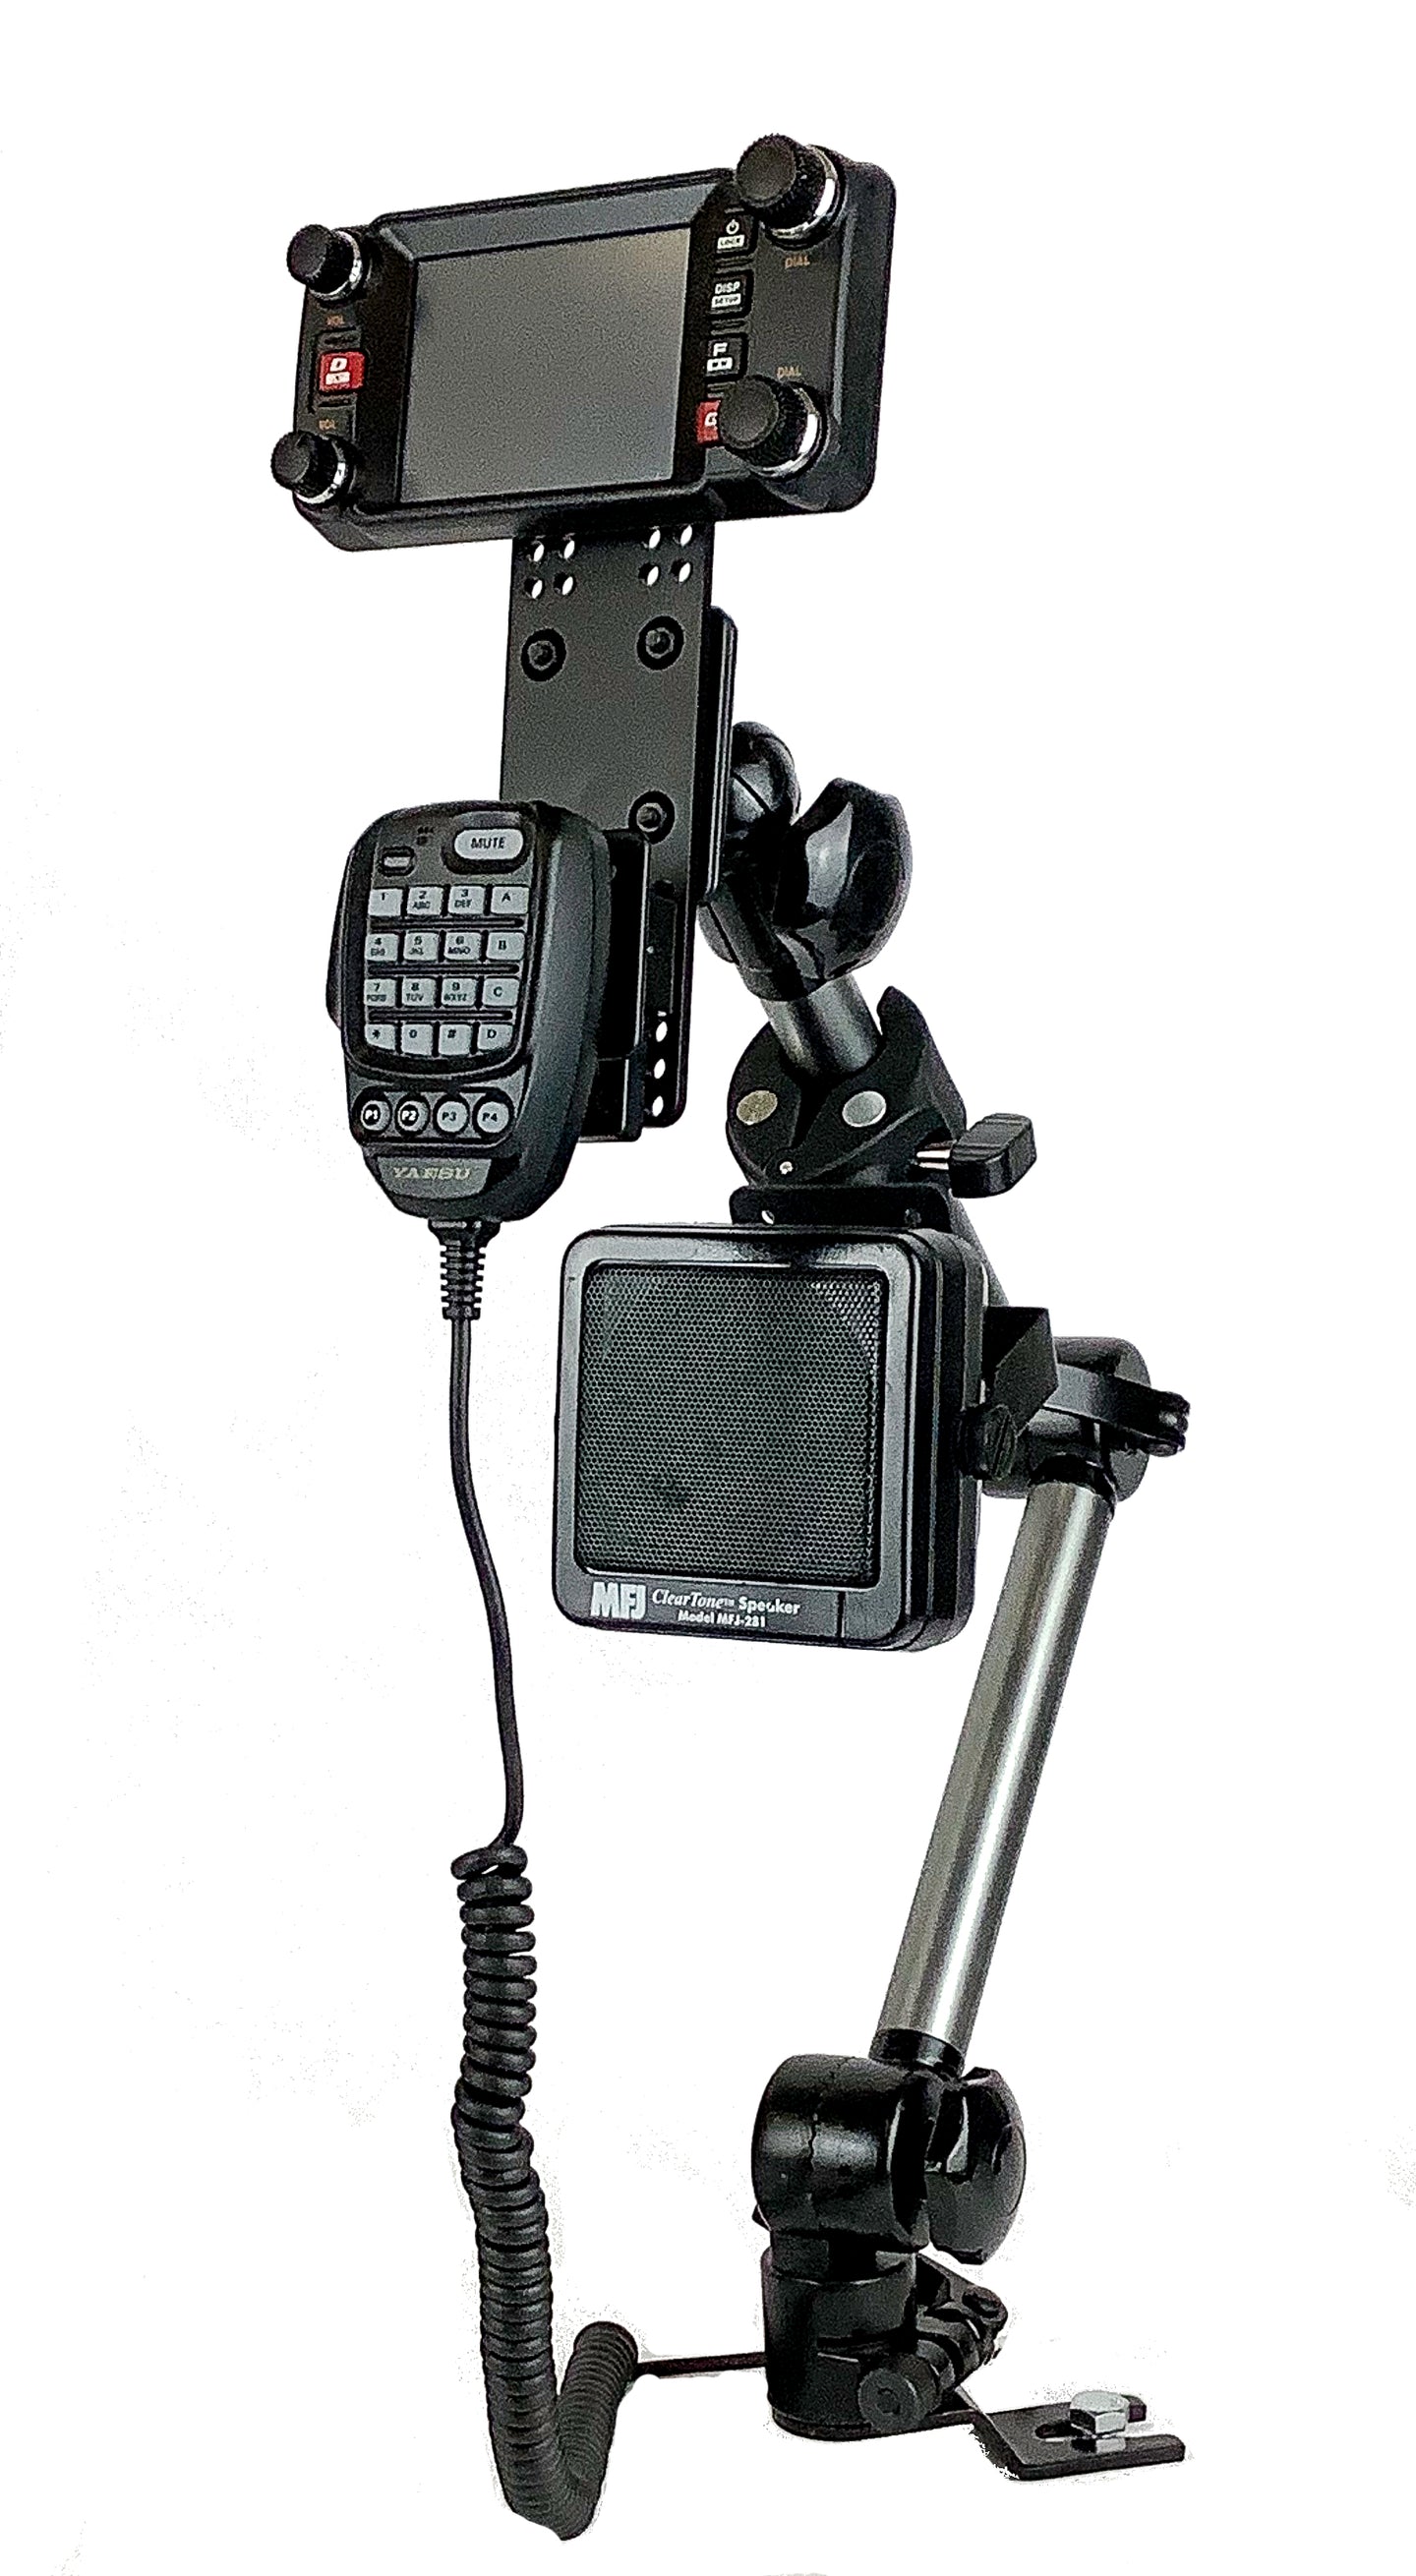 L-MAX Package For Yaesu FTM Series With Mic and External Speaker Mount